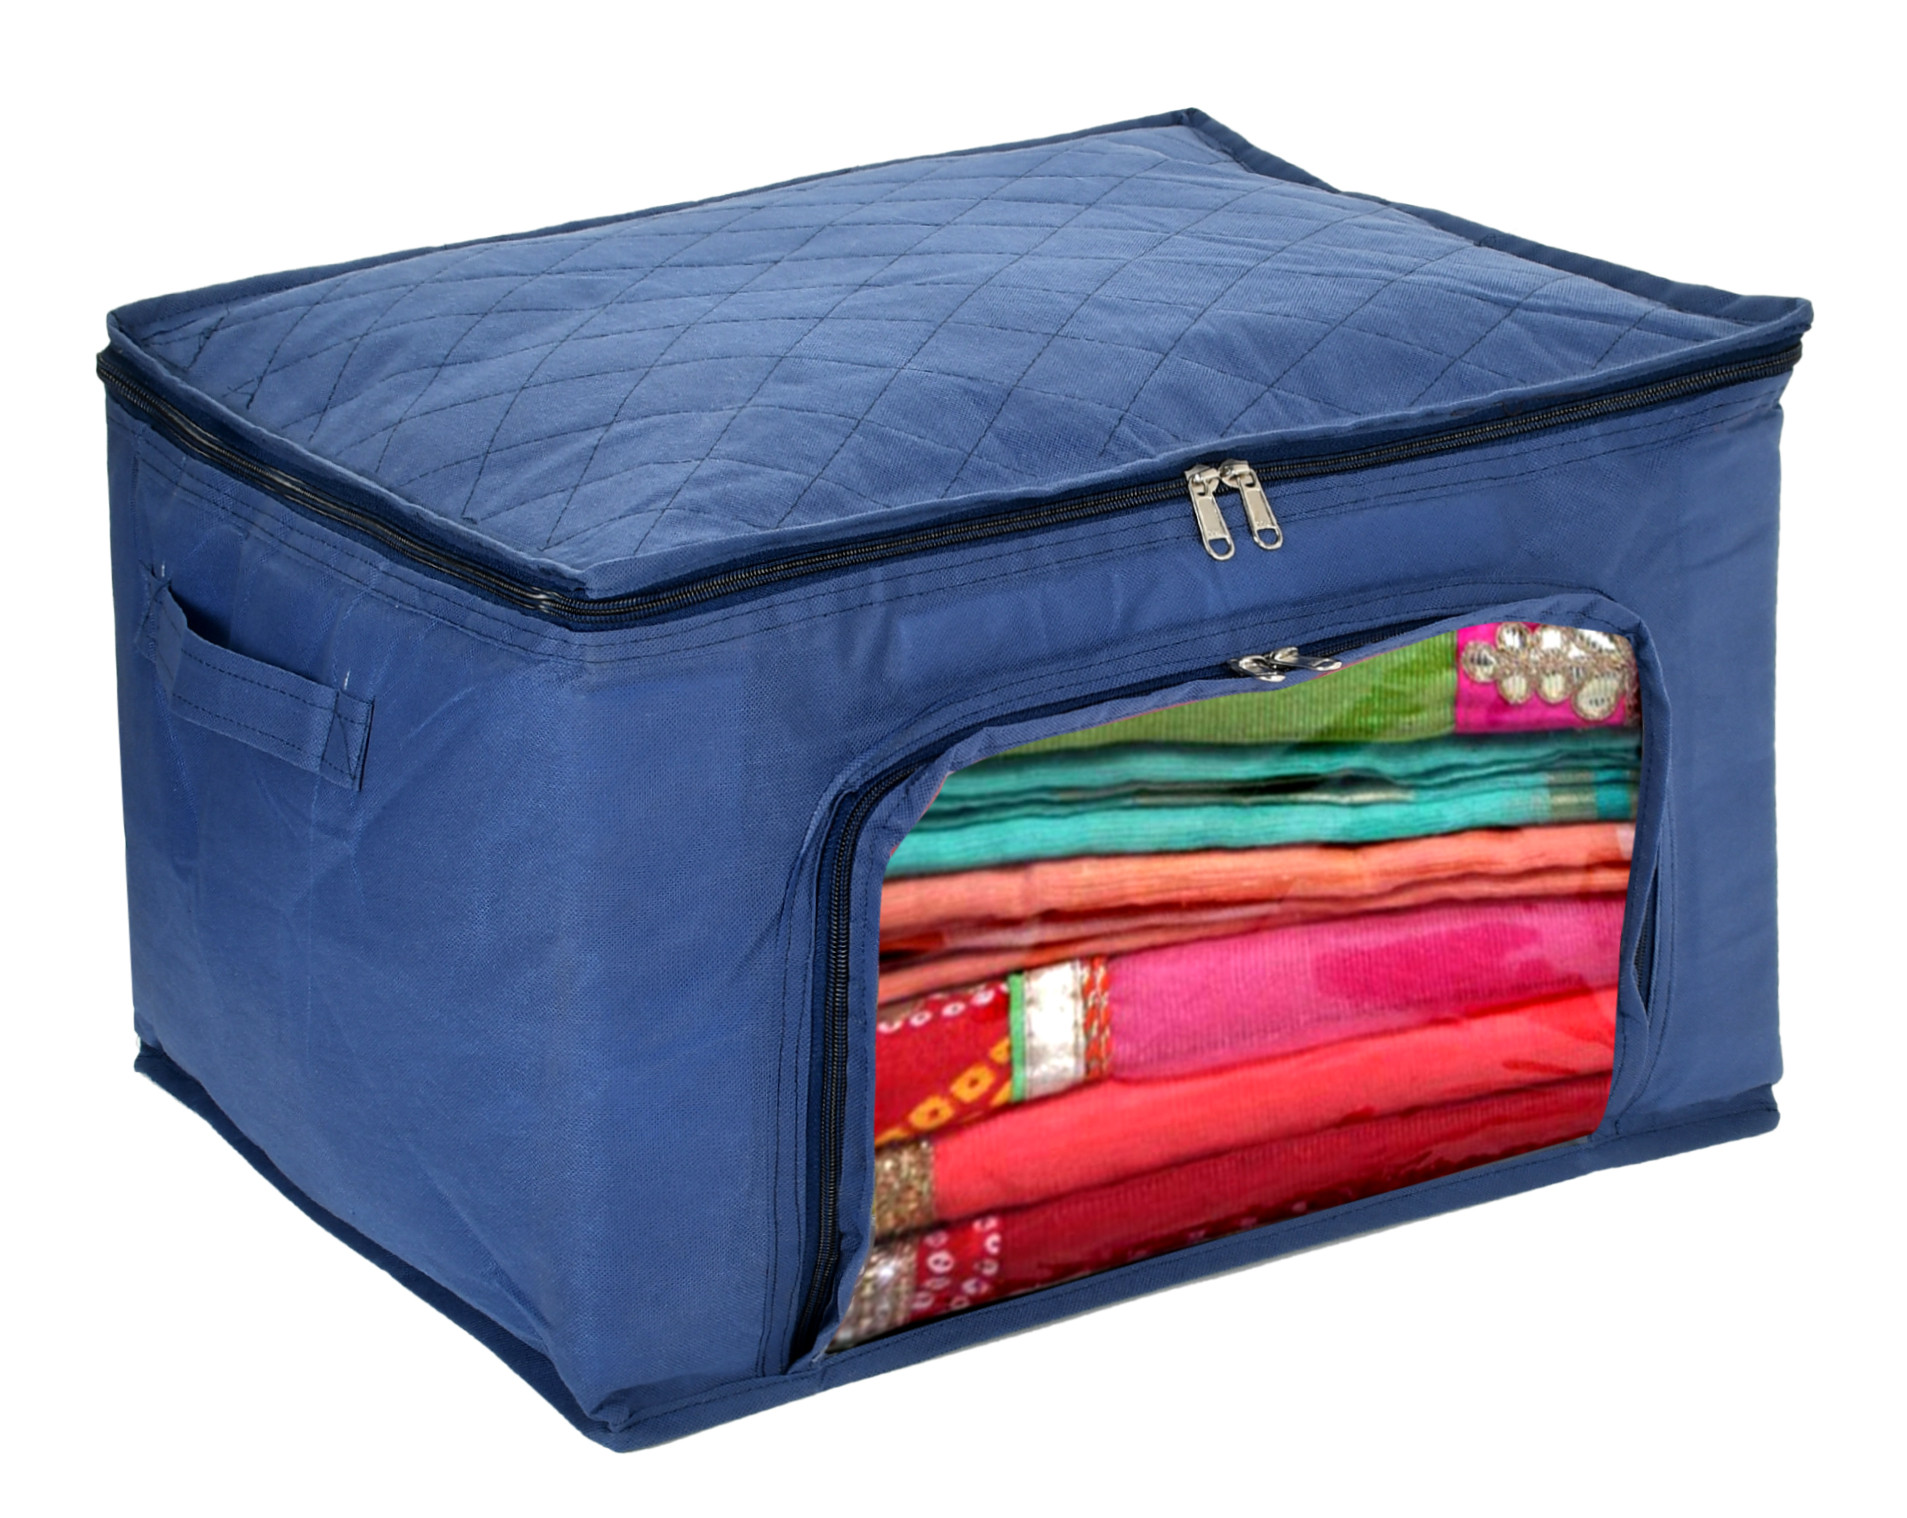 Kuber Industries Clothing Storage Bags, Under Bed Foldable Organizer, Store Blankets, Clothes With Zipper Tranasparent Window, 66 Litre (Navy Blue)-HS_38_KUBMART21293